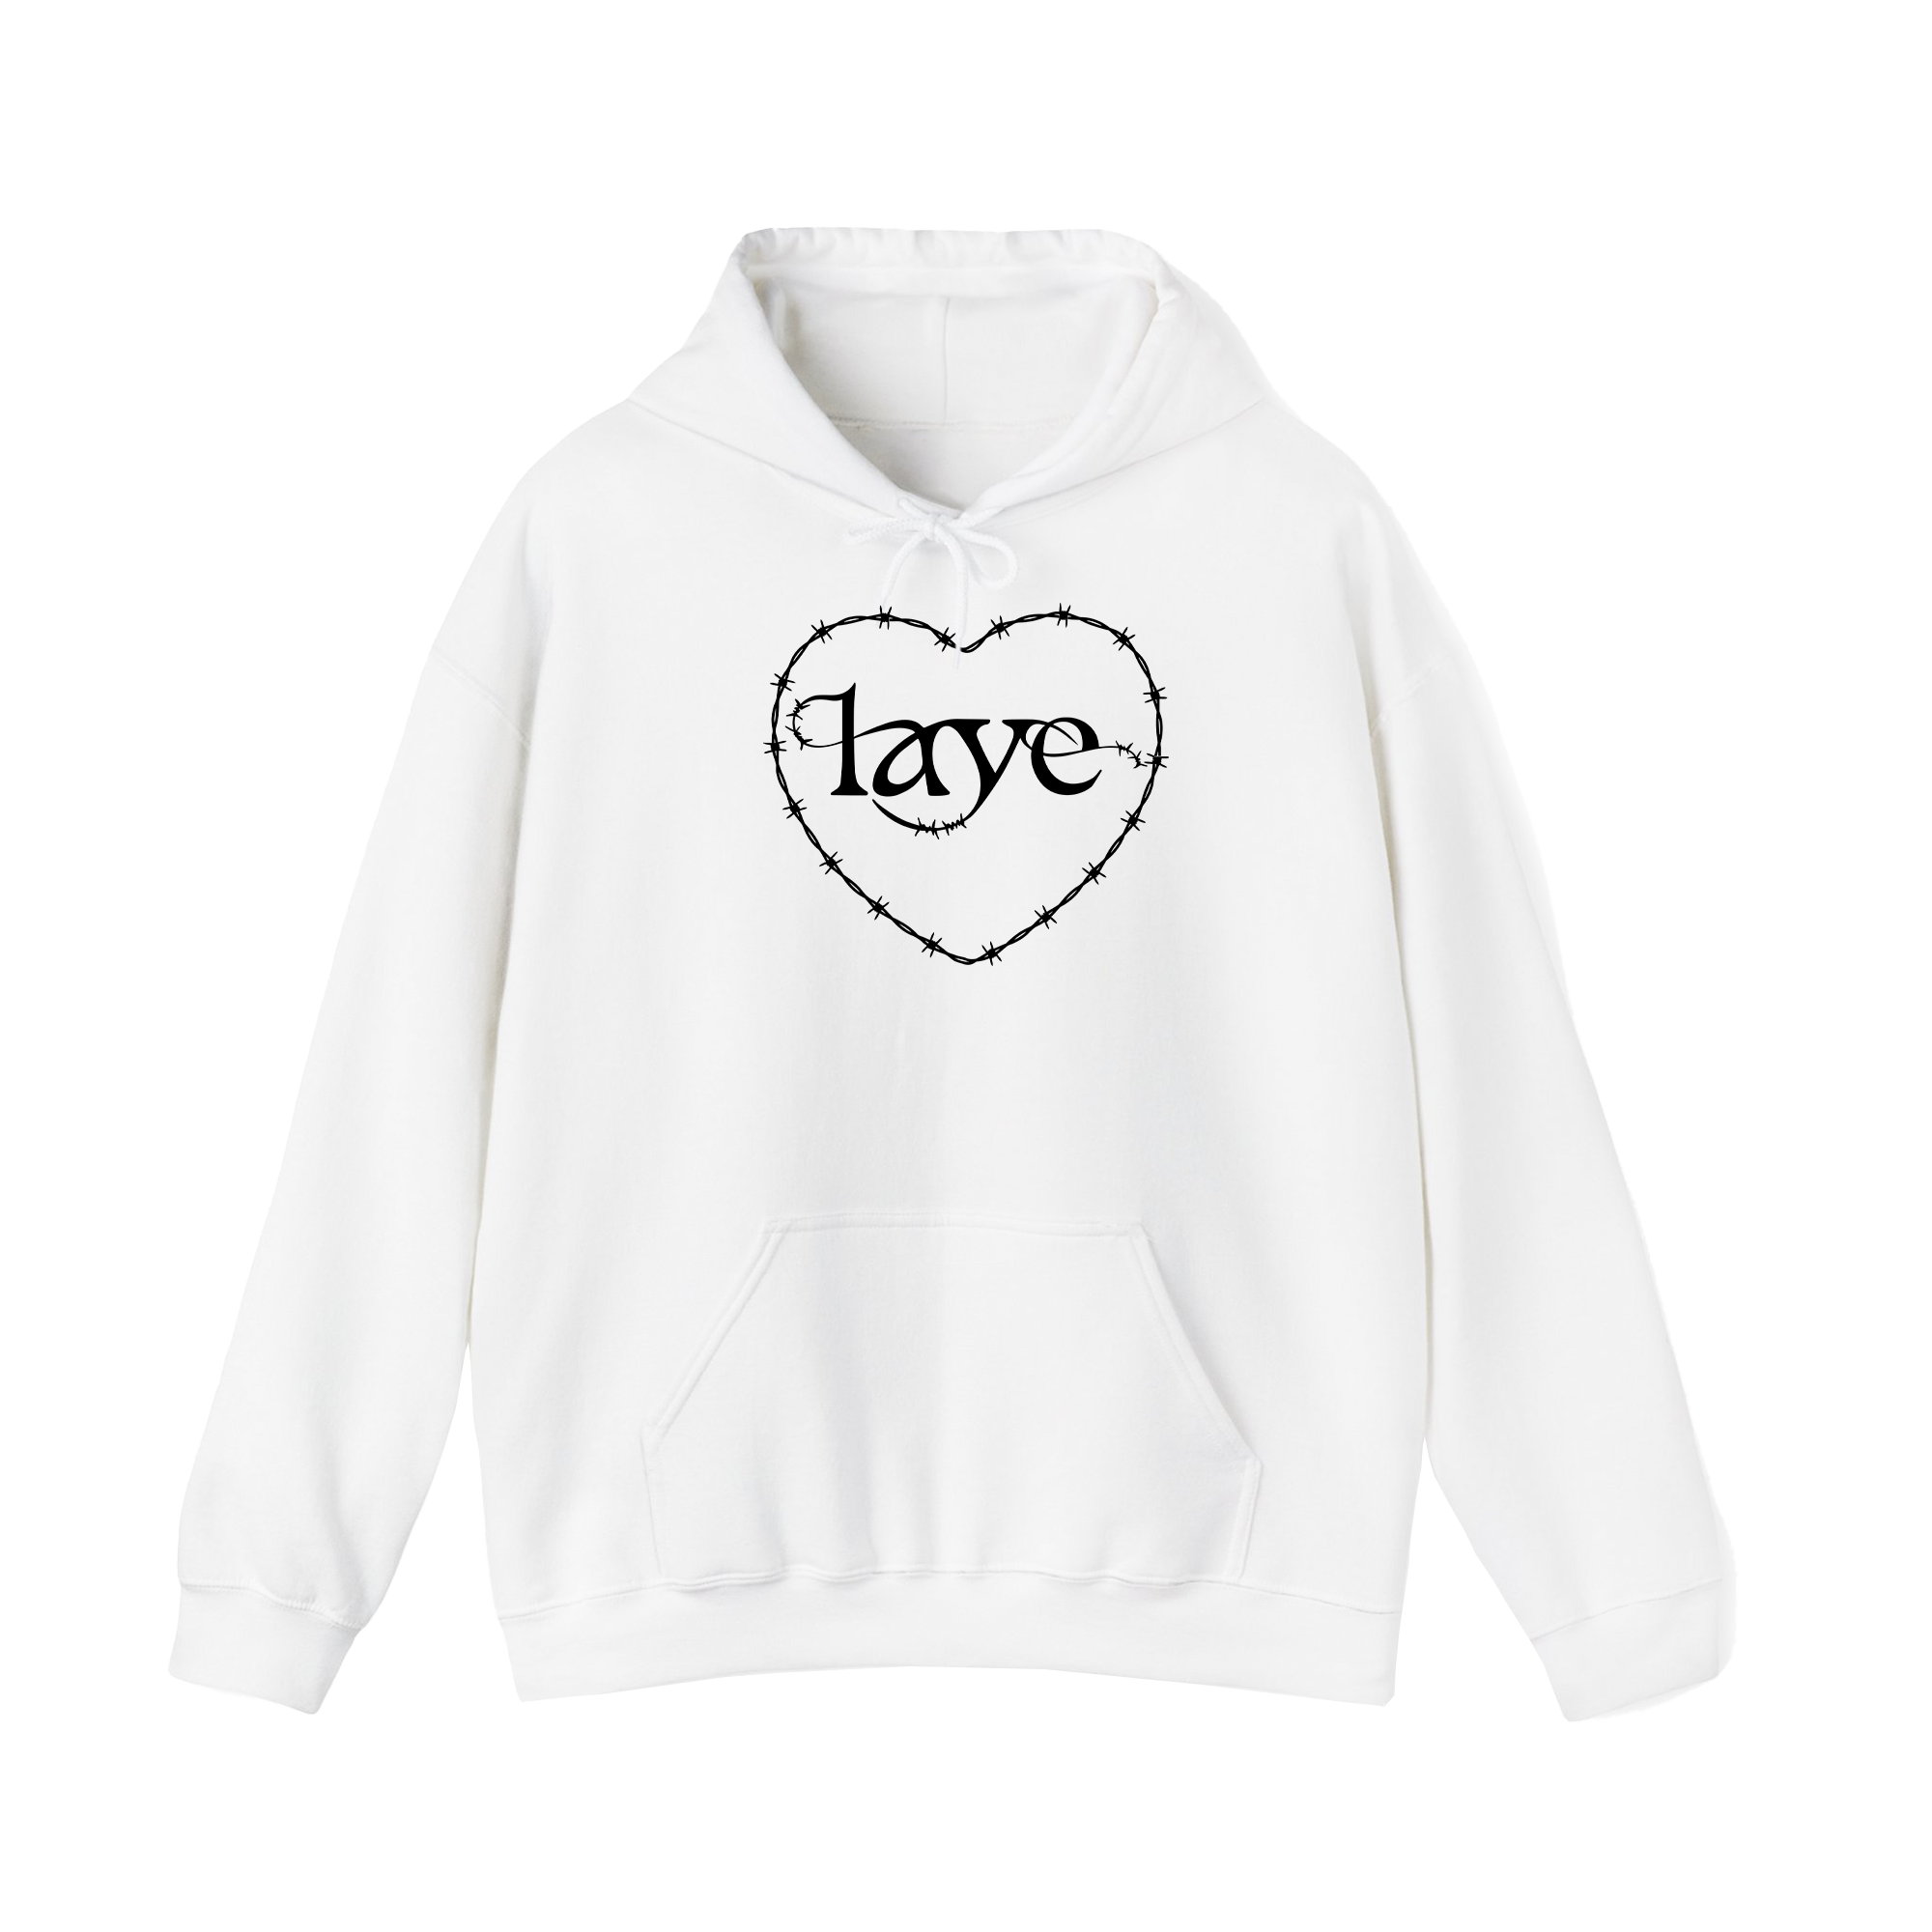 Laye - Barbed Wire Hoodie